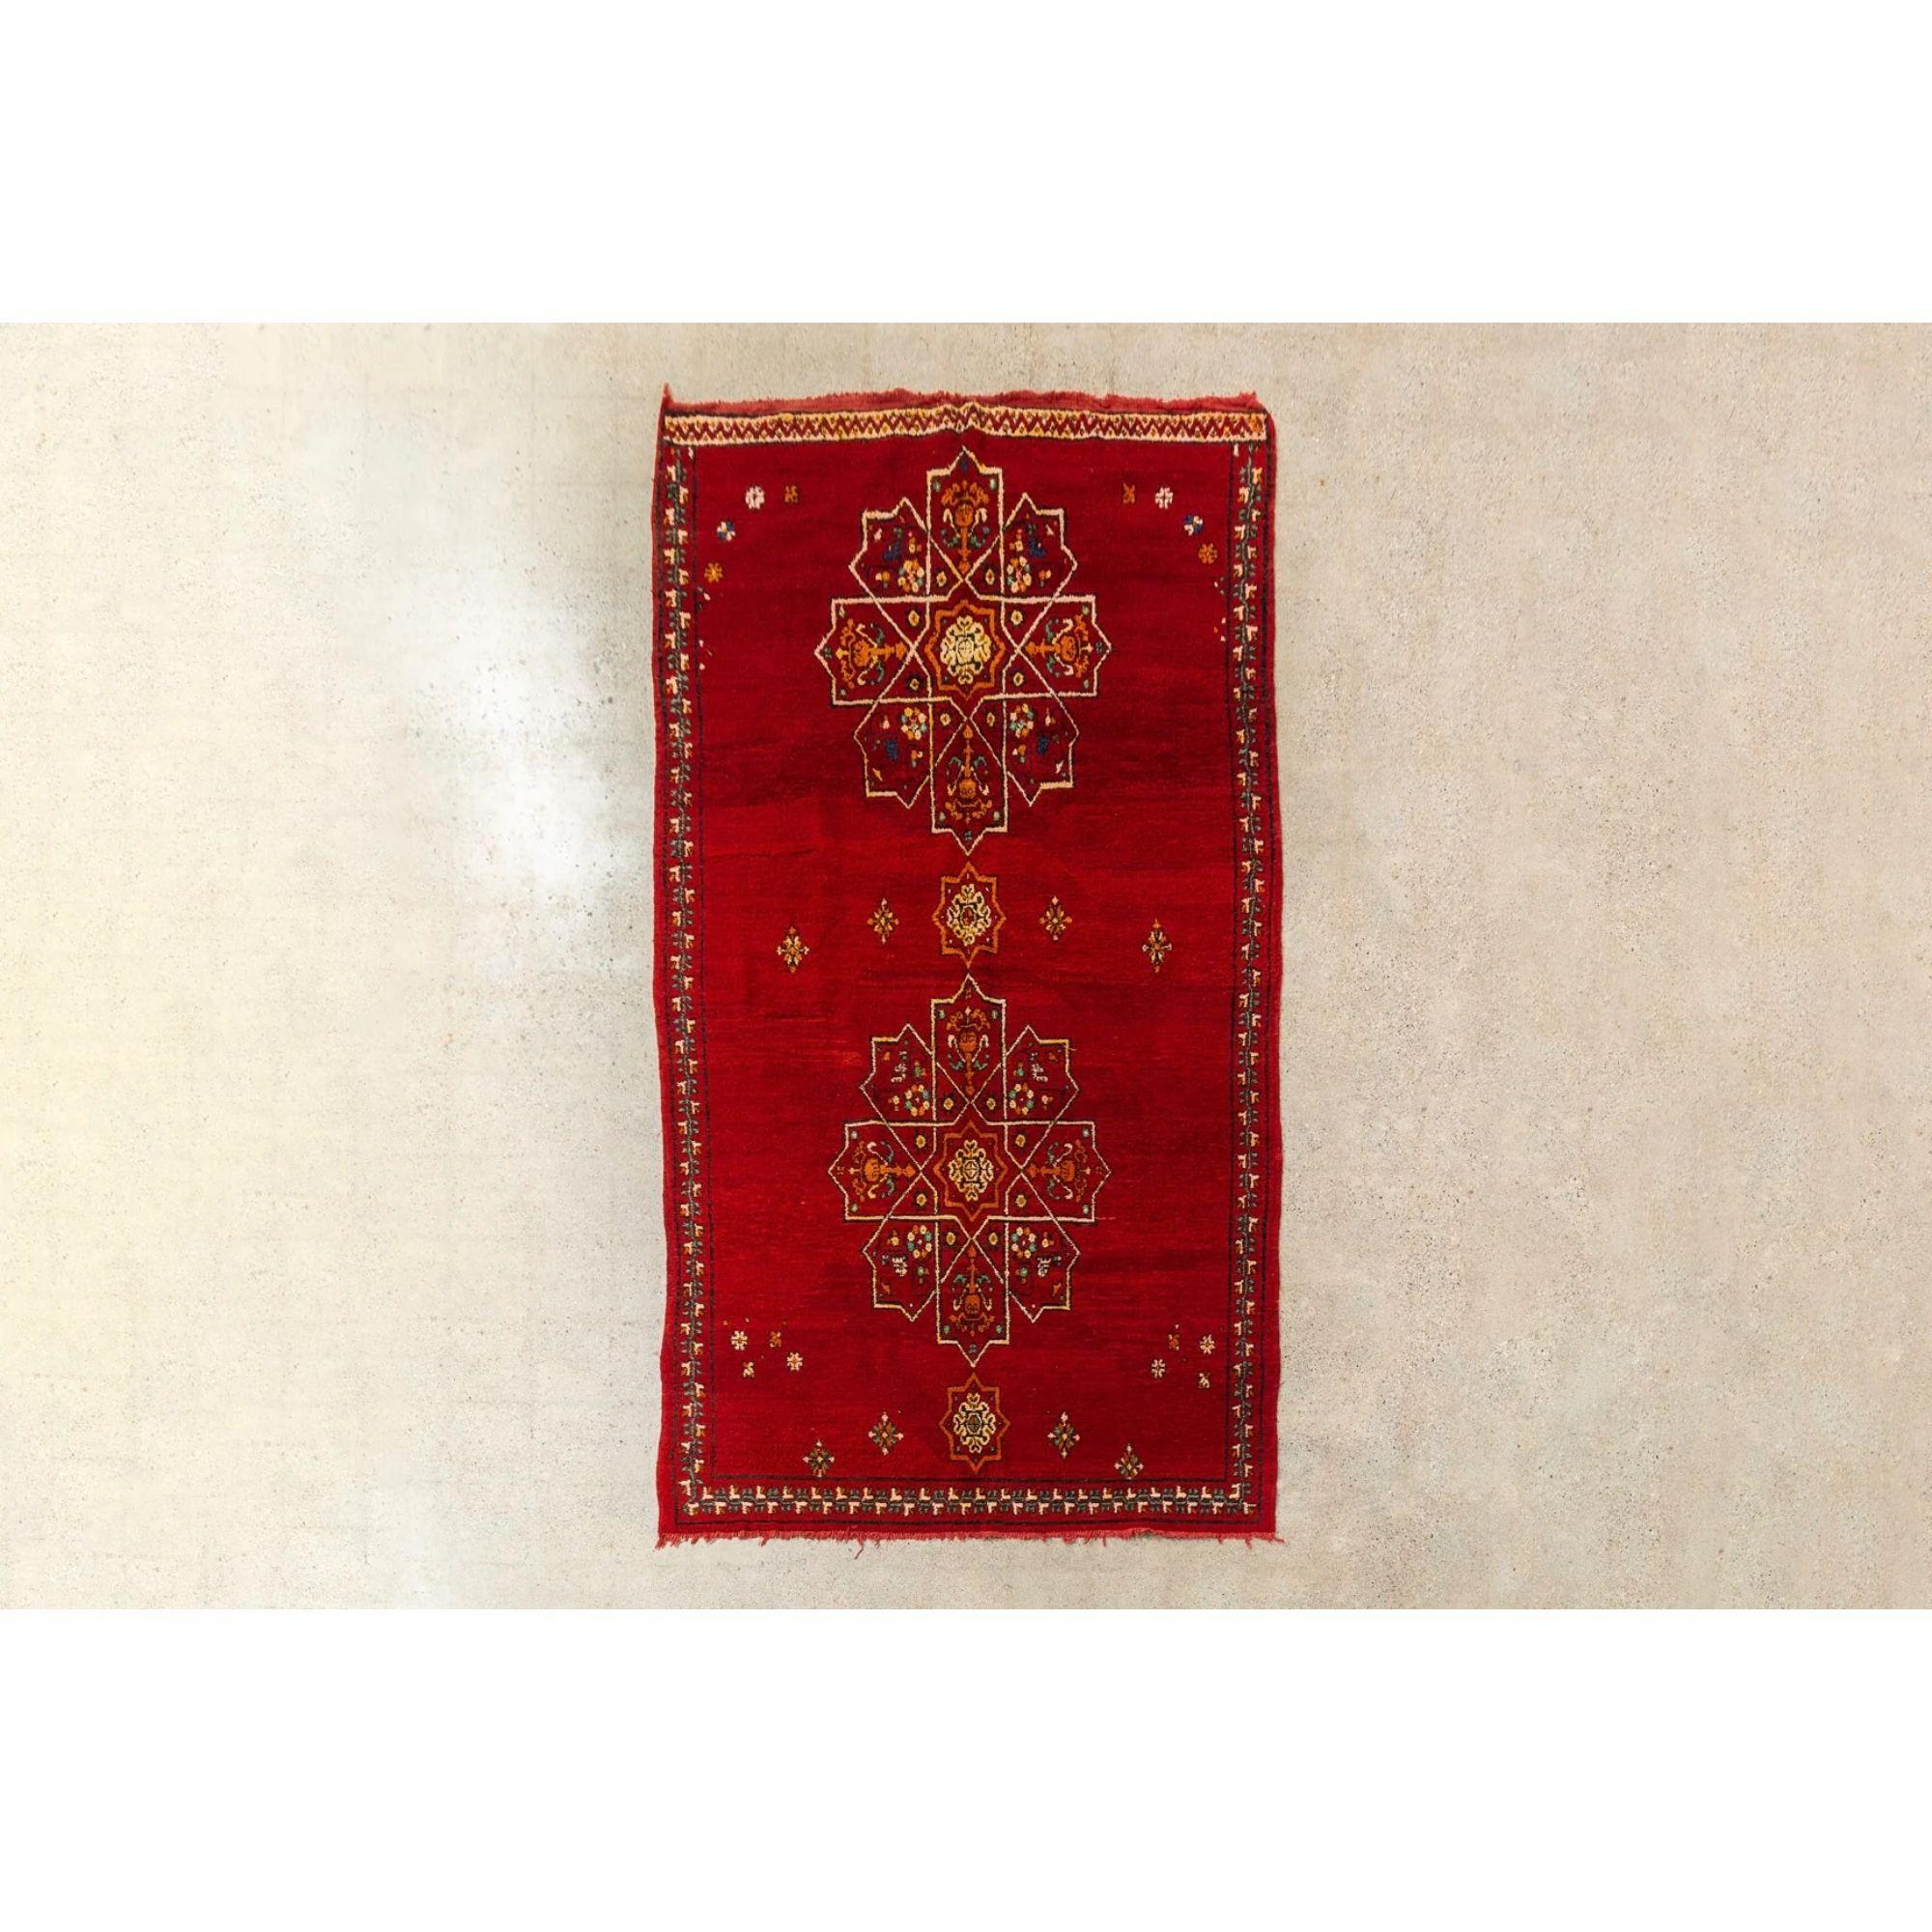 This stunning large vintage handwoven Moroccan Berber rug circa Mid-20th Century is a beautiful combination of hand knotted pile and embroidery. The design features a large symmetrical arabesque pattern on a gorgeous field of crimson red with accent